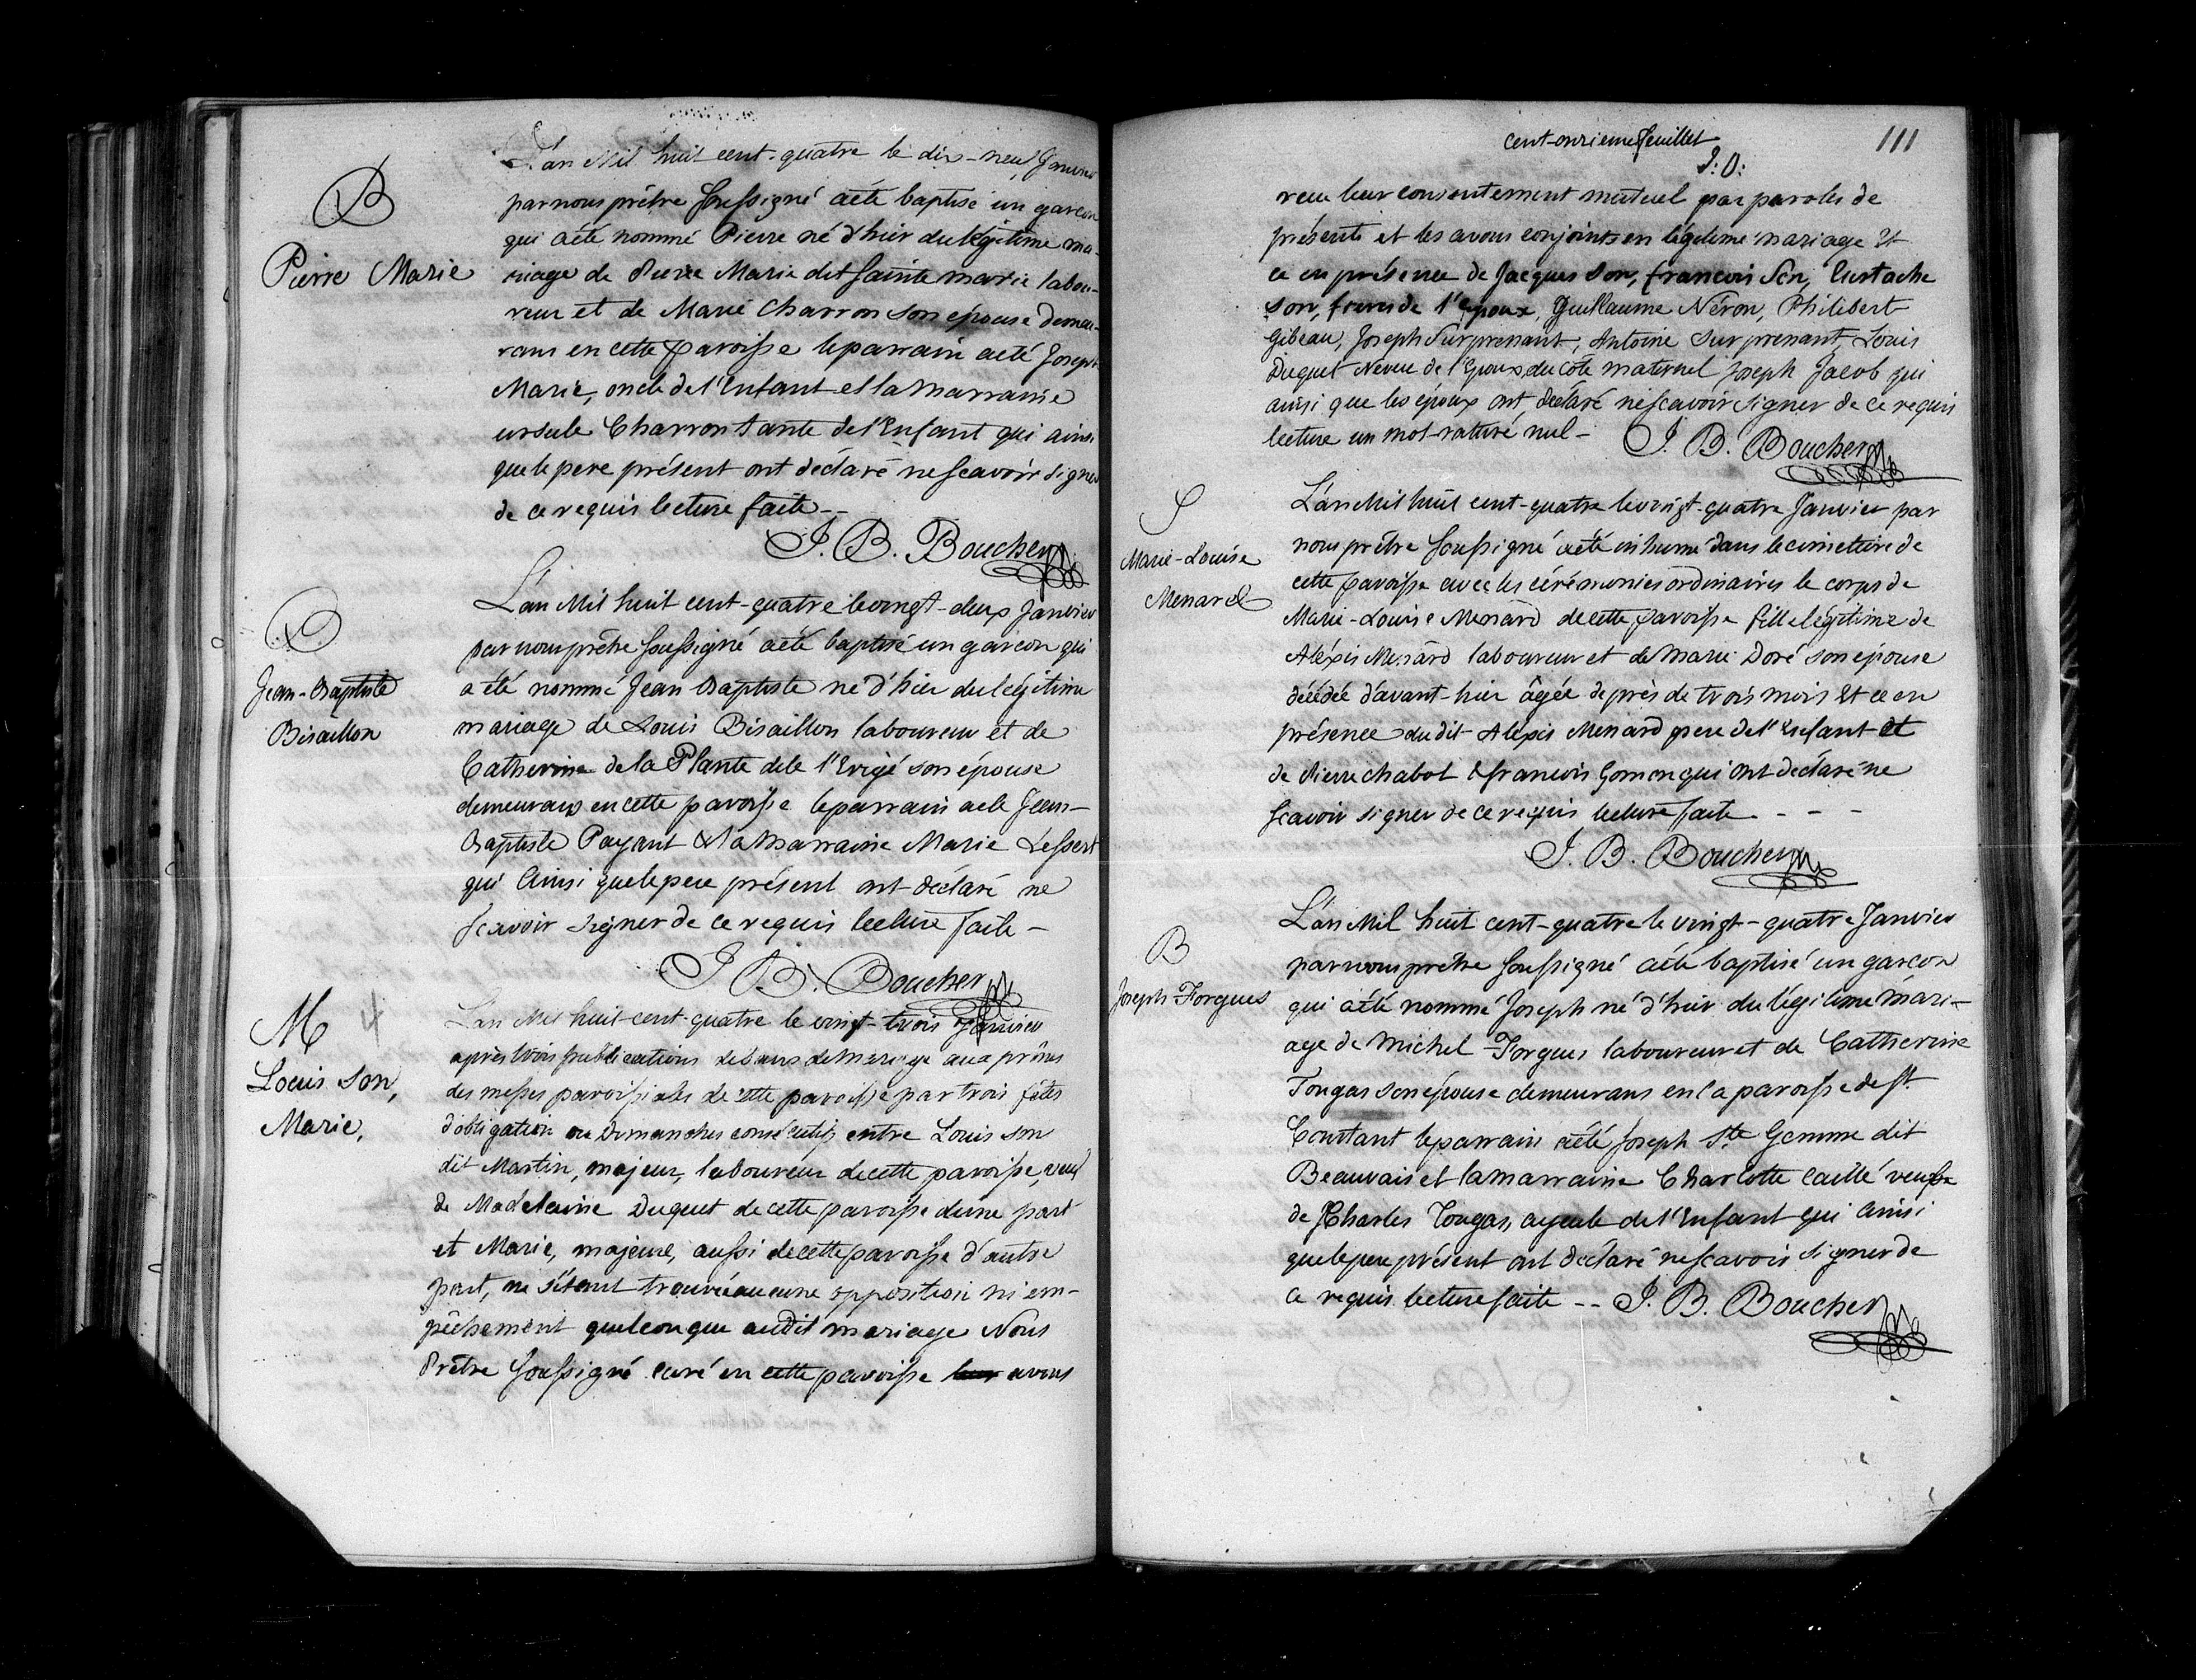 Suprenant Marriage Record 1804